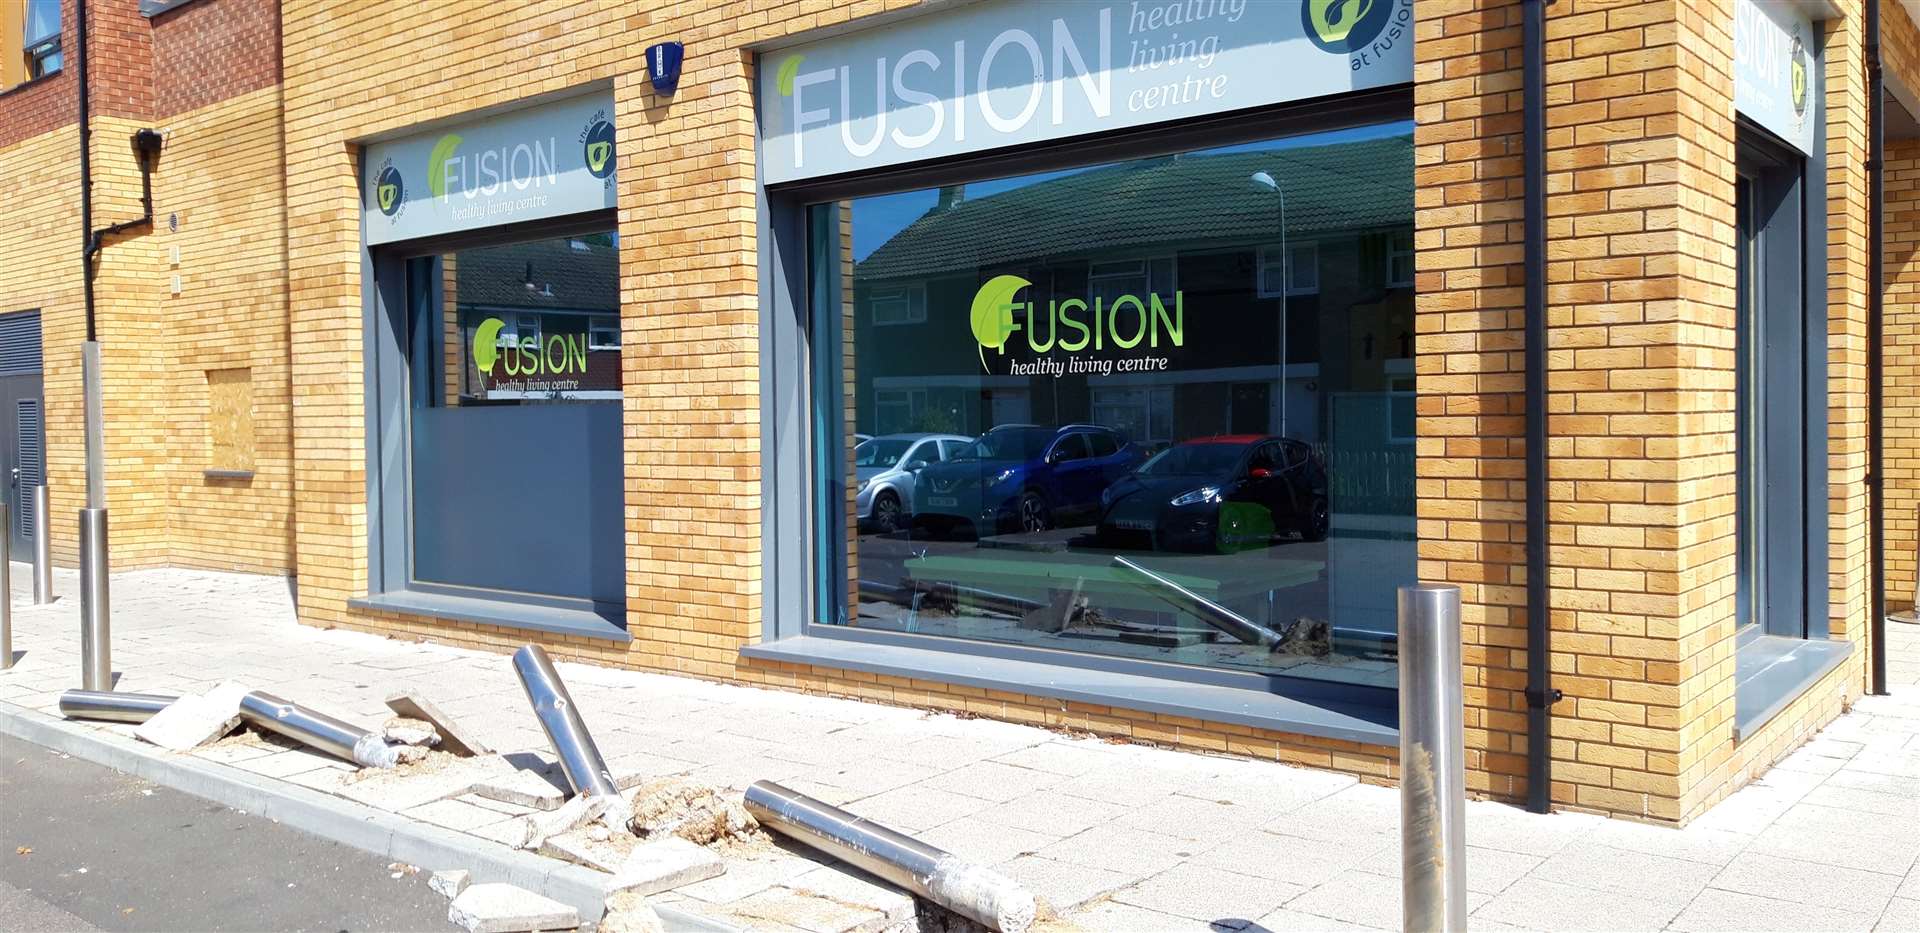 Bollards outside Fusion Healthy Living Centre were damaged during the night